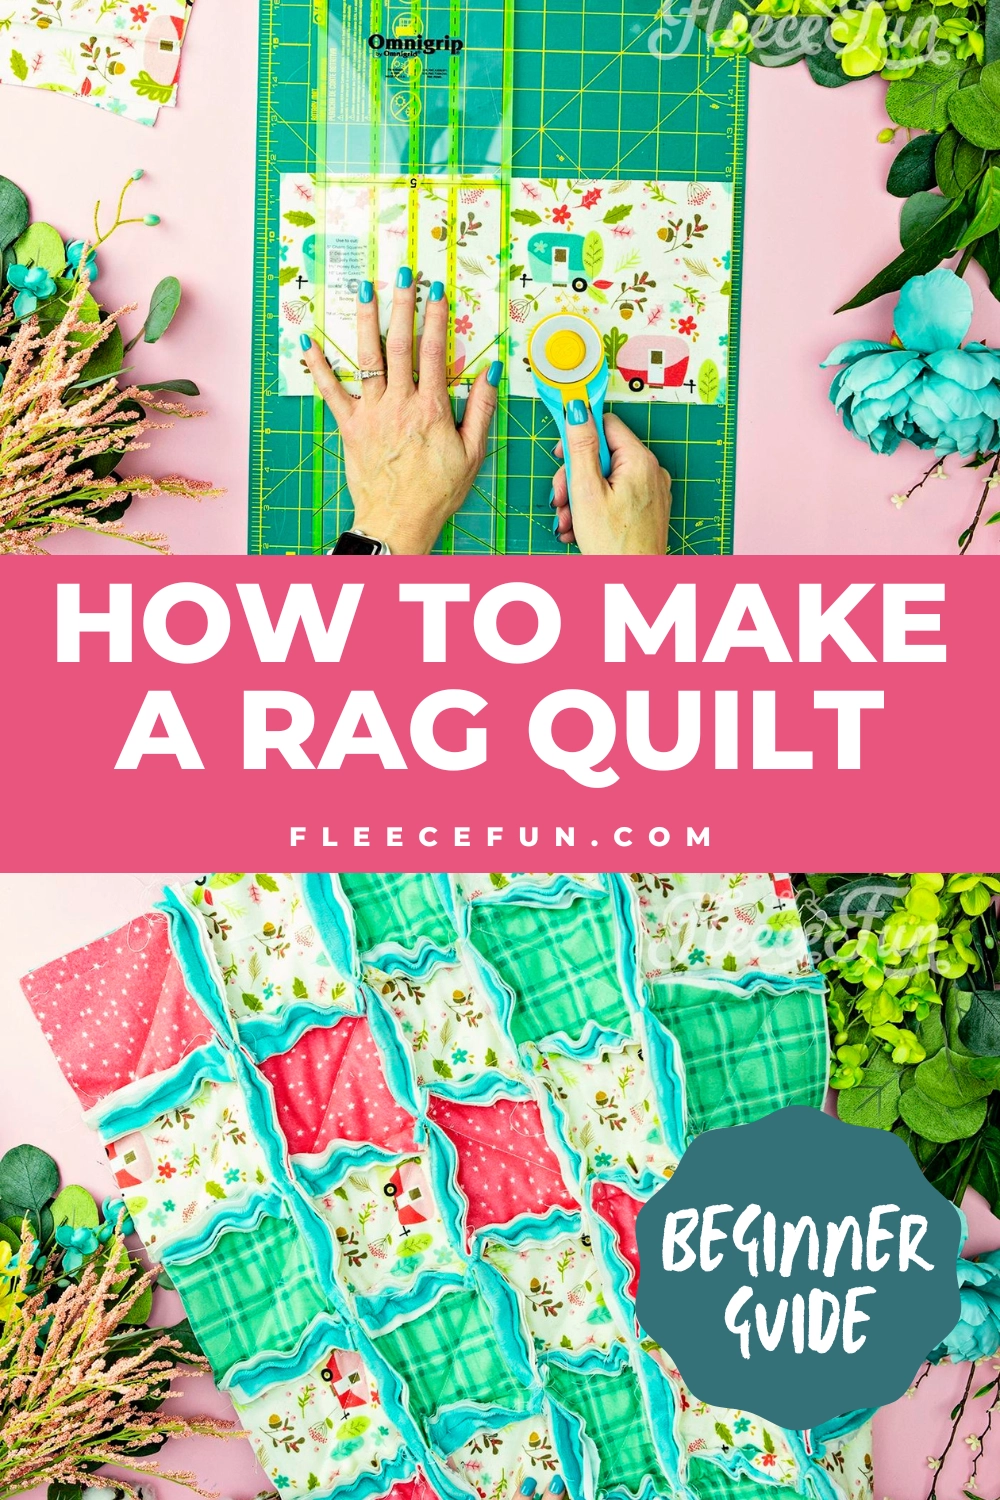 I love this tutorial. Each step has a video to walk you through it - perfect for beginners! Rag quilts are so great to snuggle under. This makes quilting and sewing look easy.